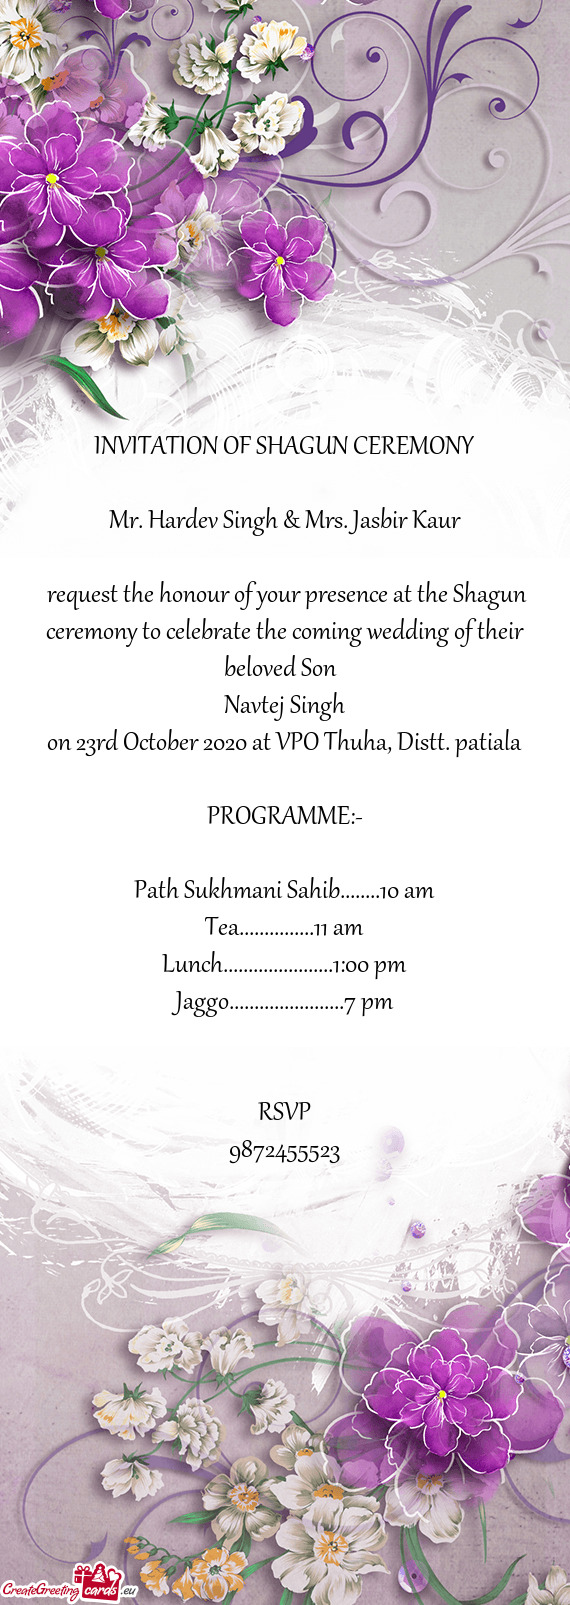 Request the honour of your presence at the Shagun ceremony to celebrate the coming wedding of their